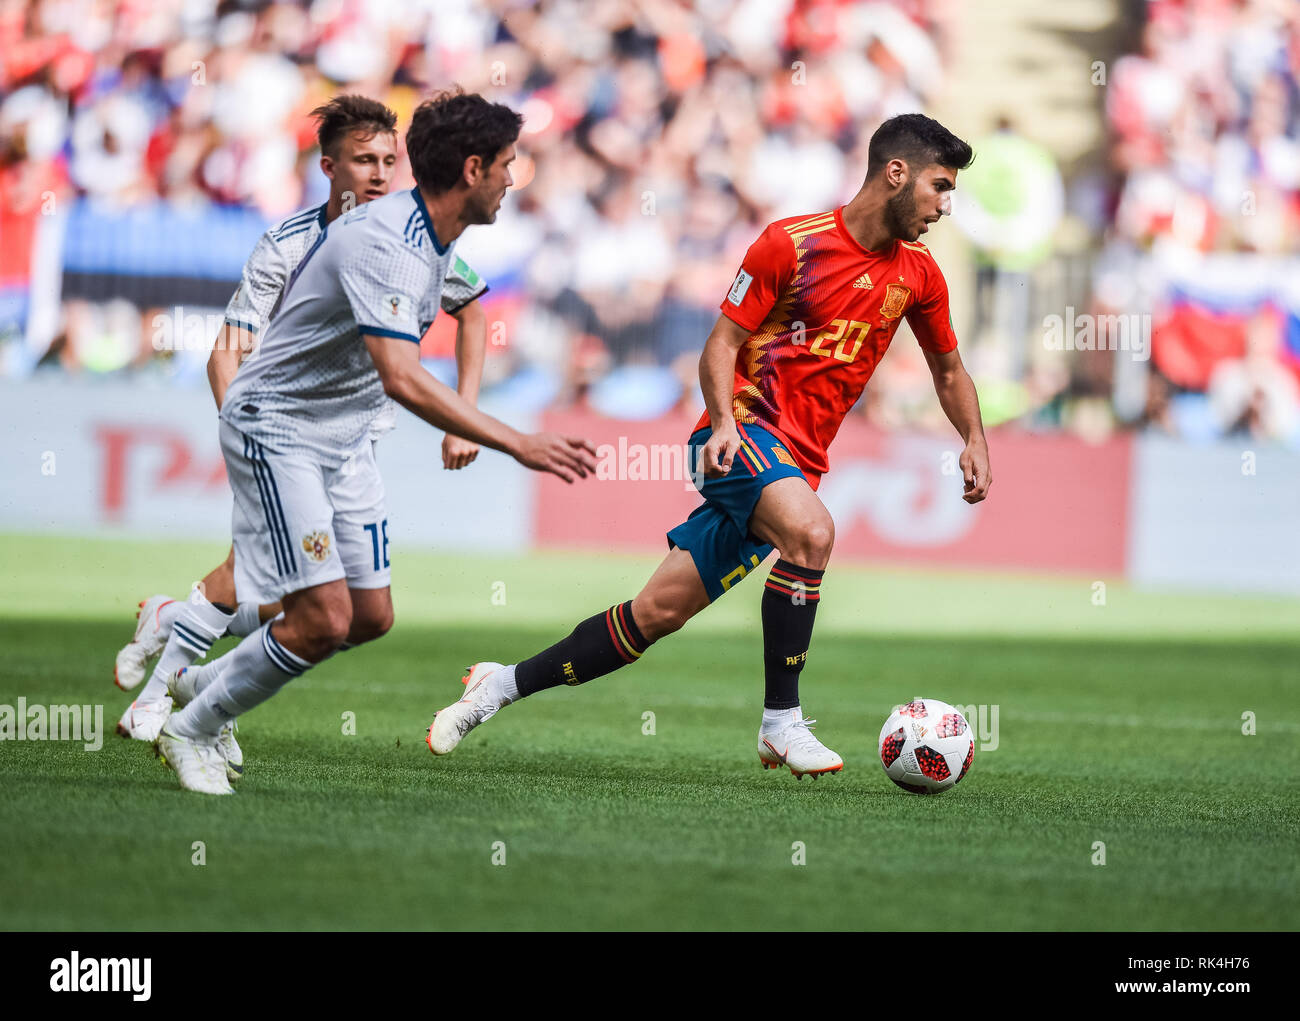 Moscow, Russia - July 1, 2018. Spain national football team midfielder Marco Asensio against Russian players Yury Zhirkov and Aleksandr Golovin during Stock Photo